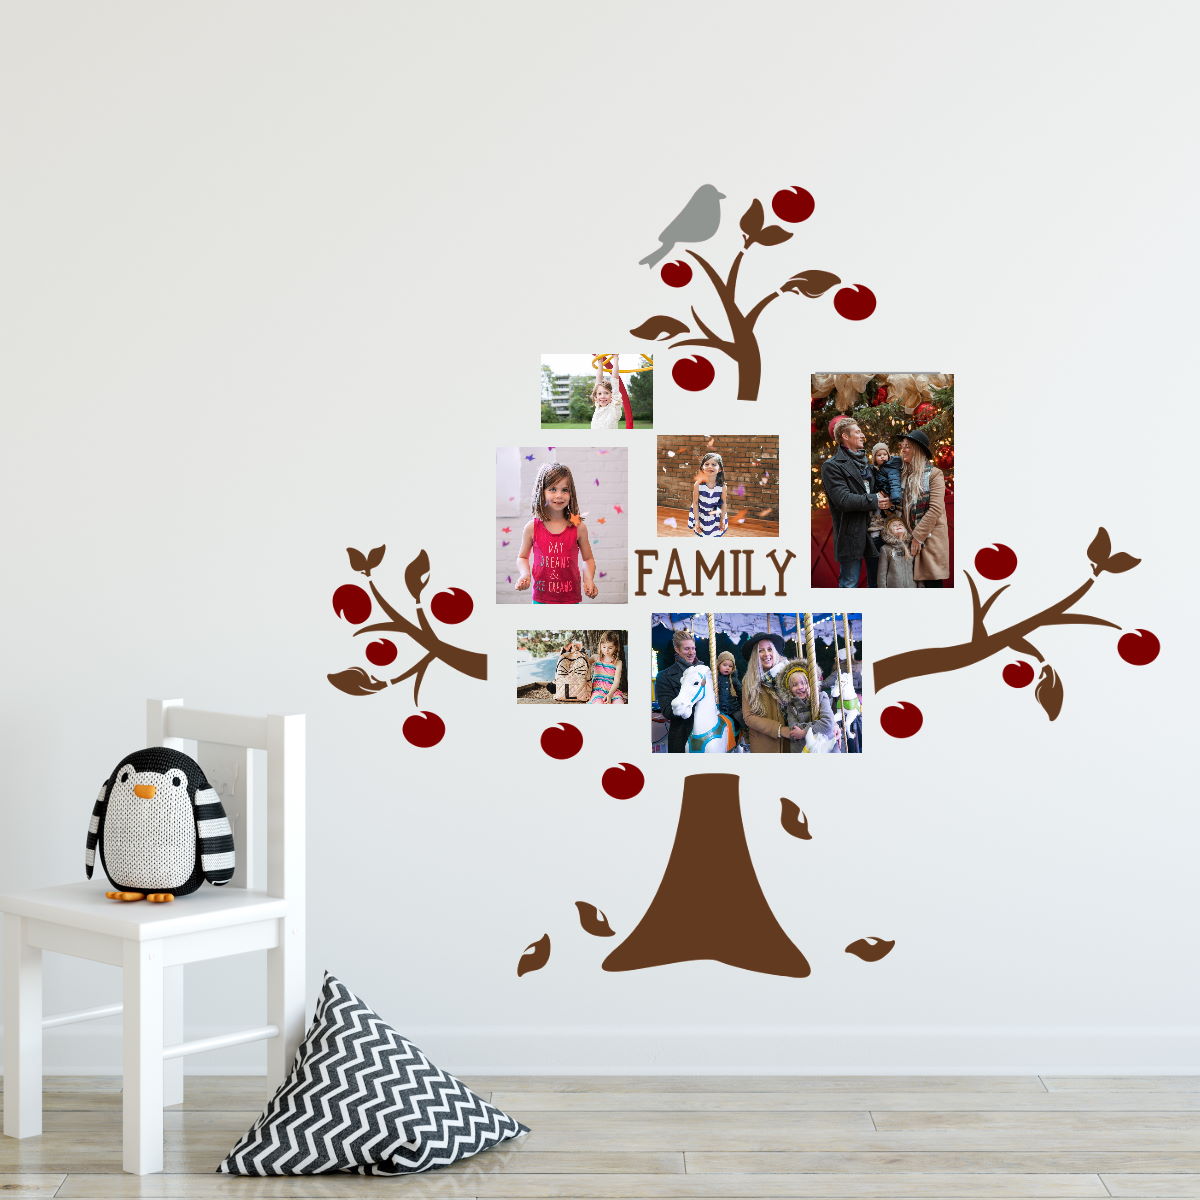 family tree wall decal red fruits